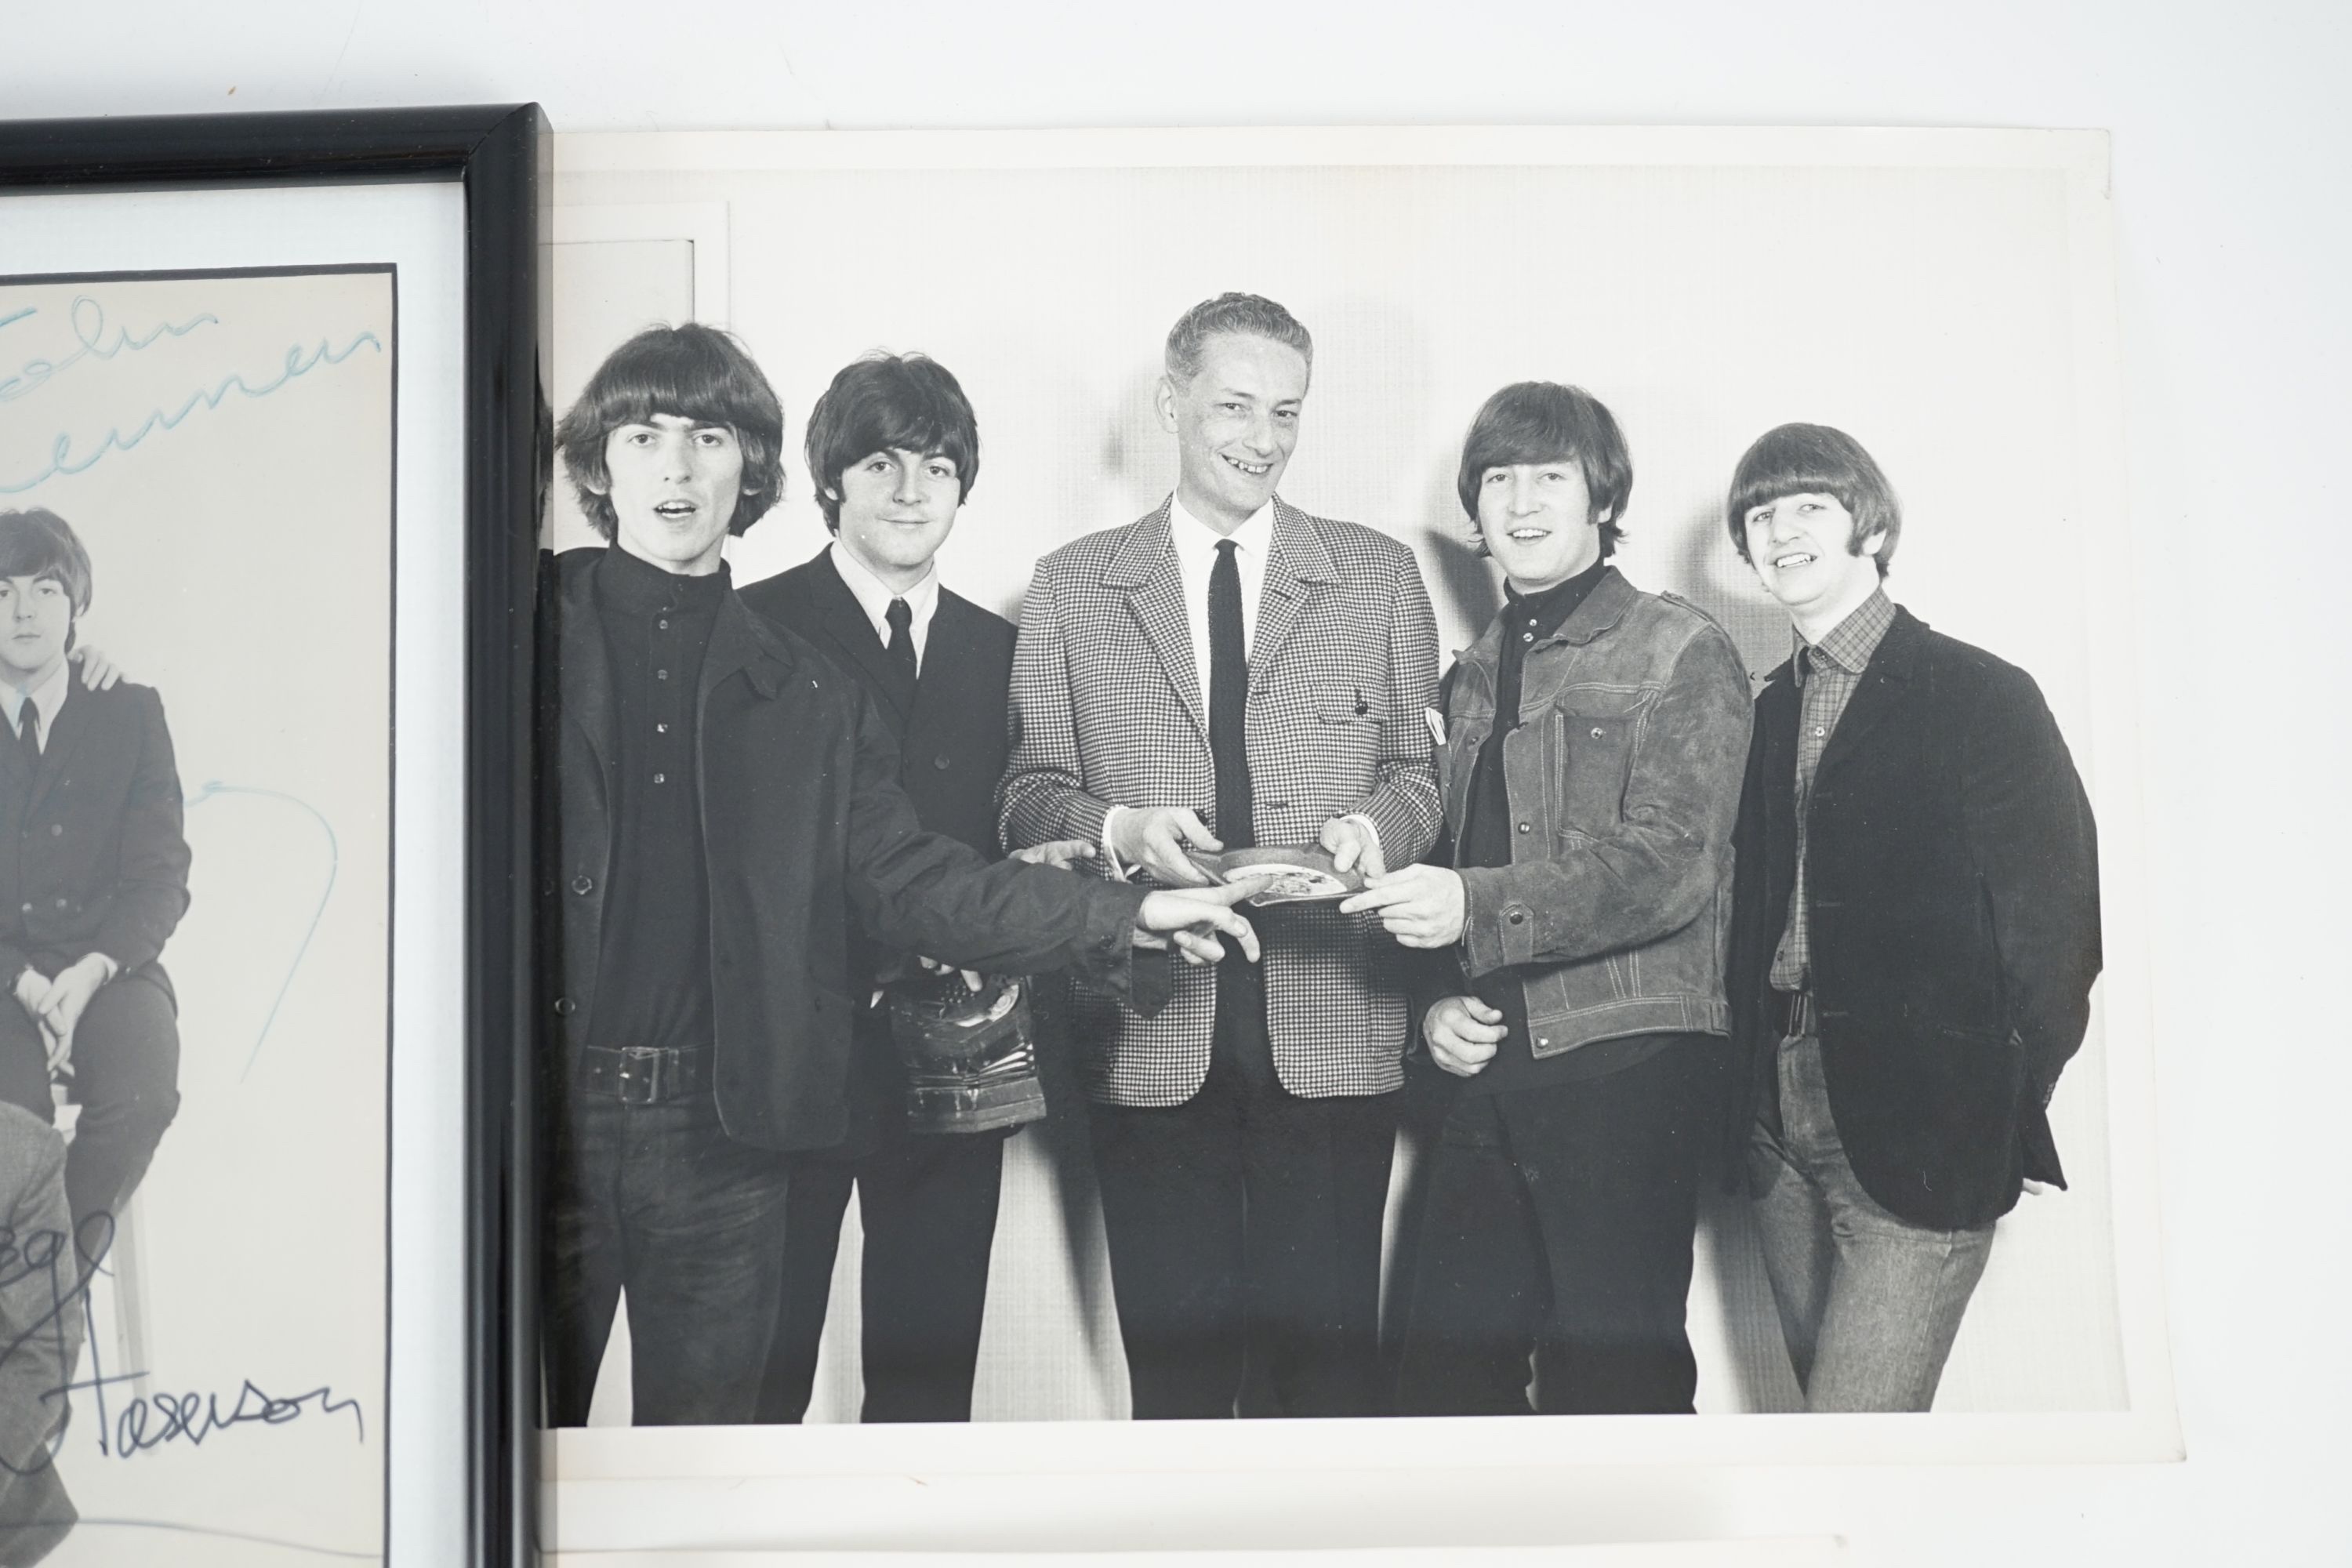 An autographed Beatles photograph and four related photographs of the Beatles with Peter Aldersley Autographed photo 19.5 x 14.5cm.